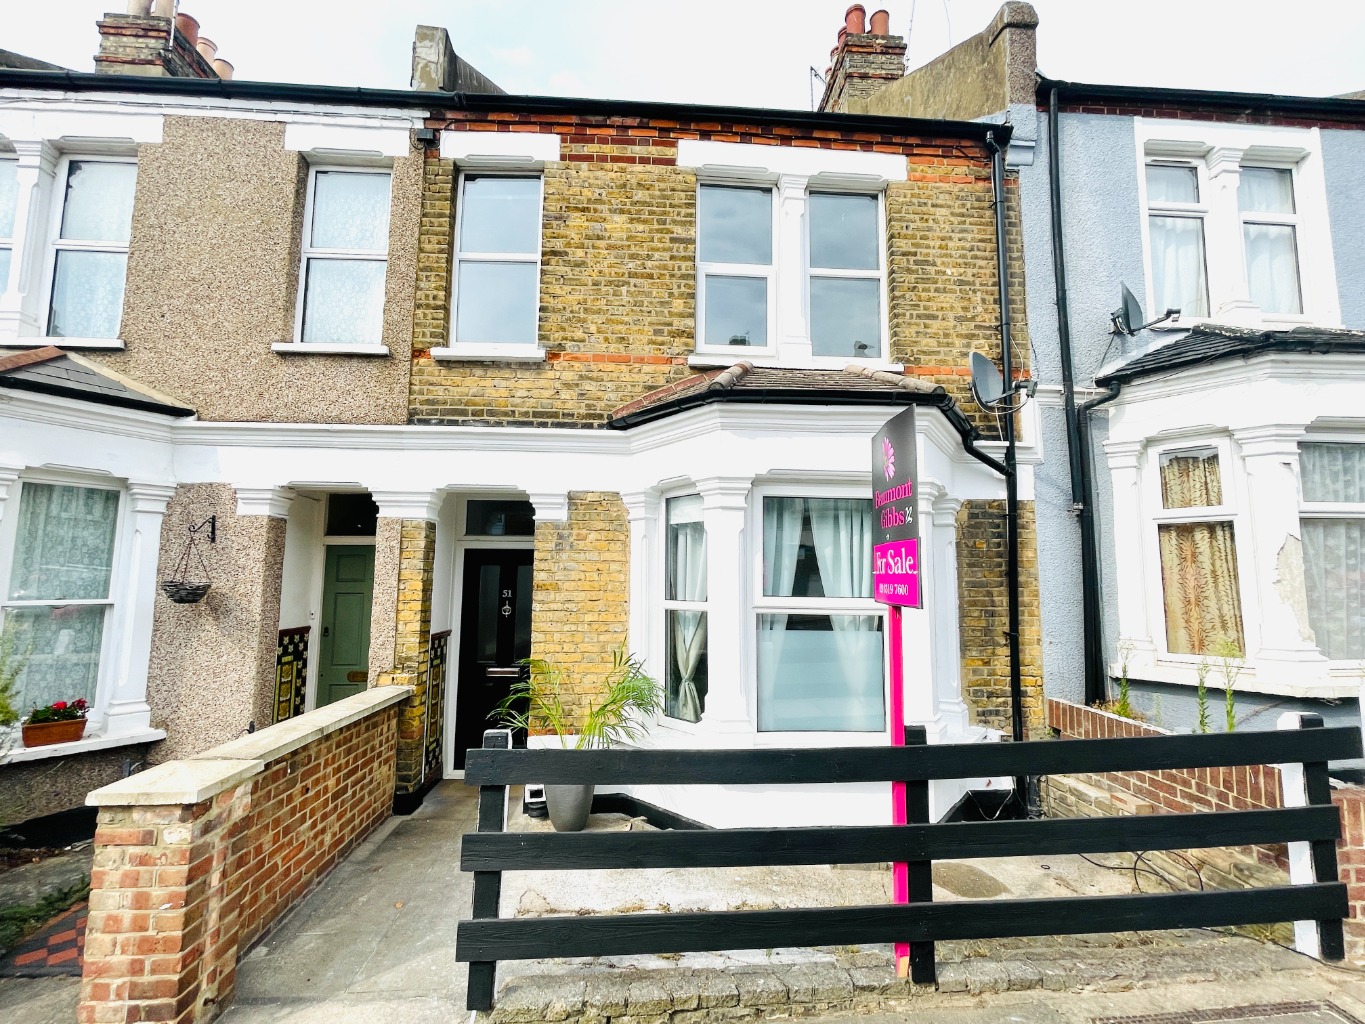 Three bedroomed brick and bay fronted Victorian terrace house for sale. Situated in a very popular and residential road in the Shooters Hill Slopes